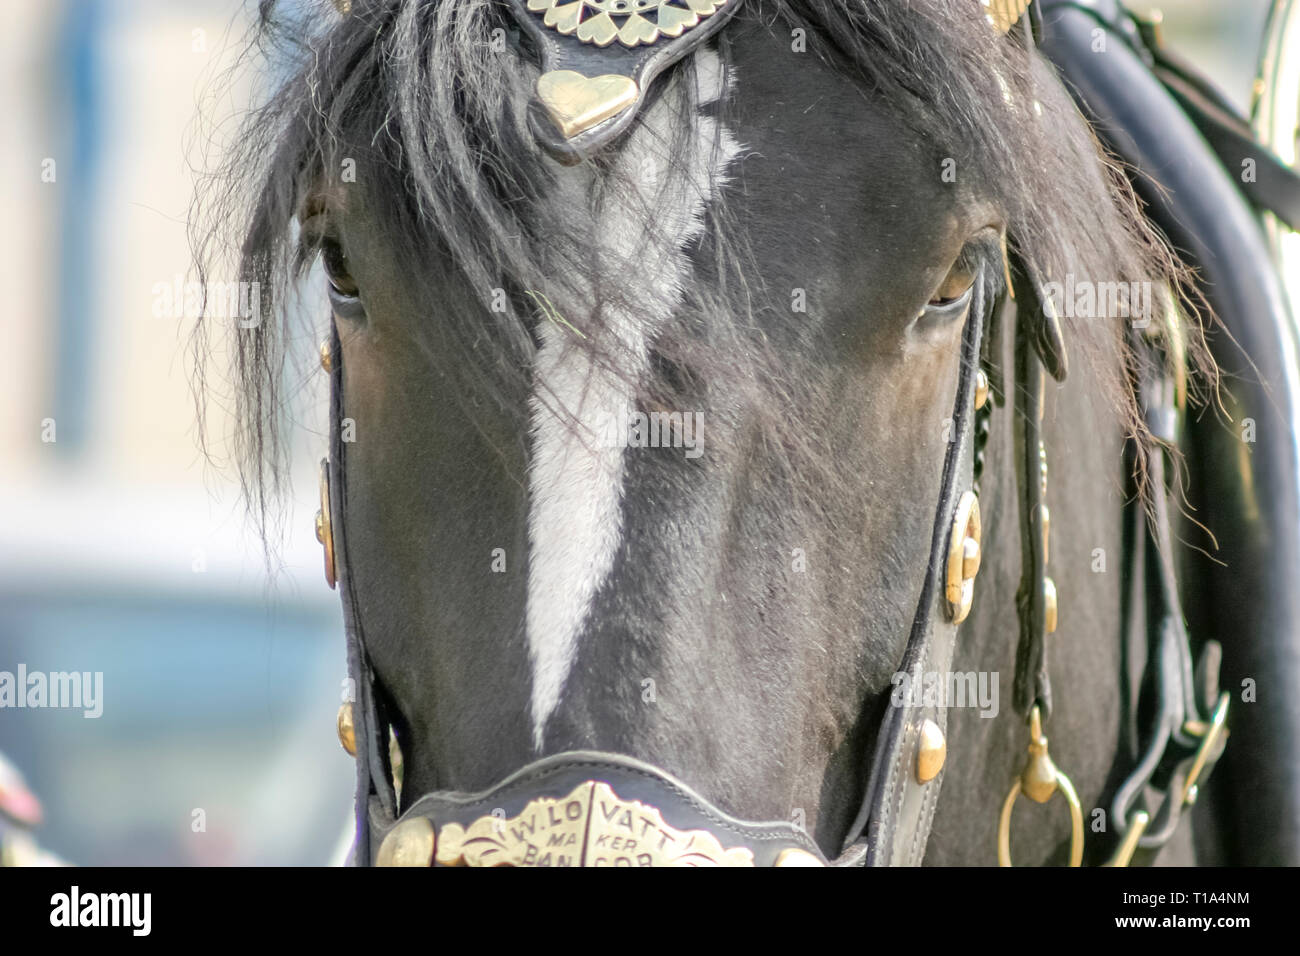 A plough horse at a country fair with leather harness and horse brasses Stock Photo